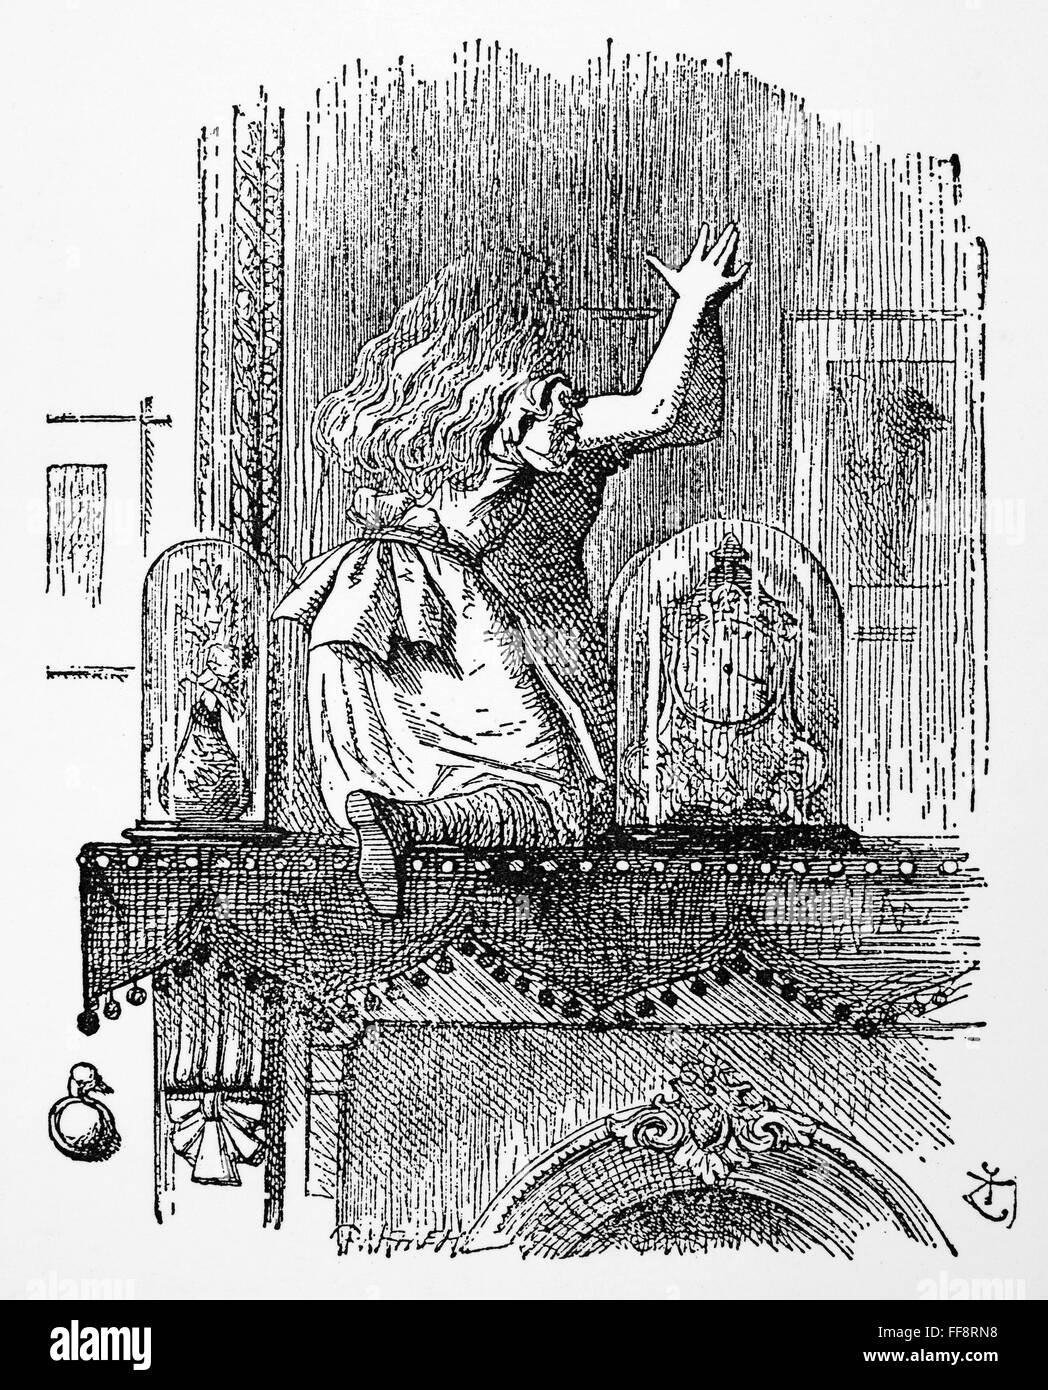 CARROLL: LOOKING GLASS. /nAlice at the Looking-Glass. Illustration by John Tenniel from the first edition of Lewis Carroll's 'Through the Looking Glass,' 1872. Stock Photo